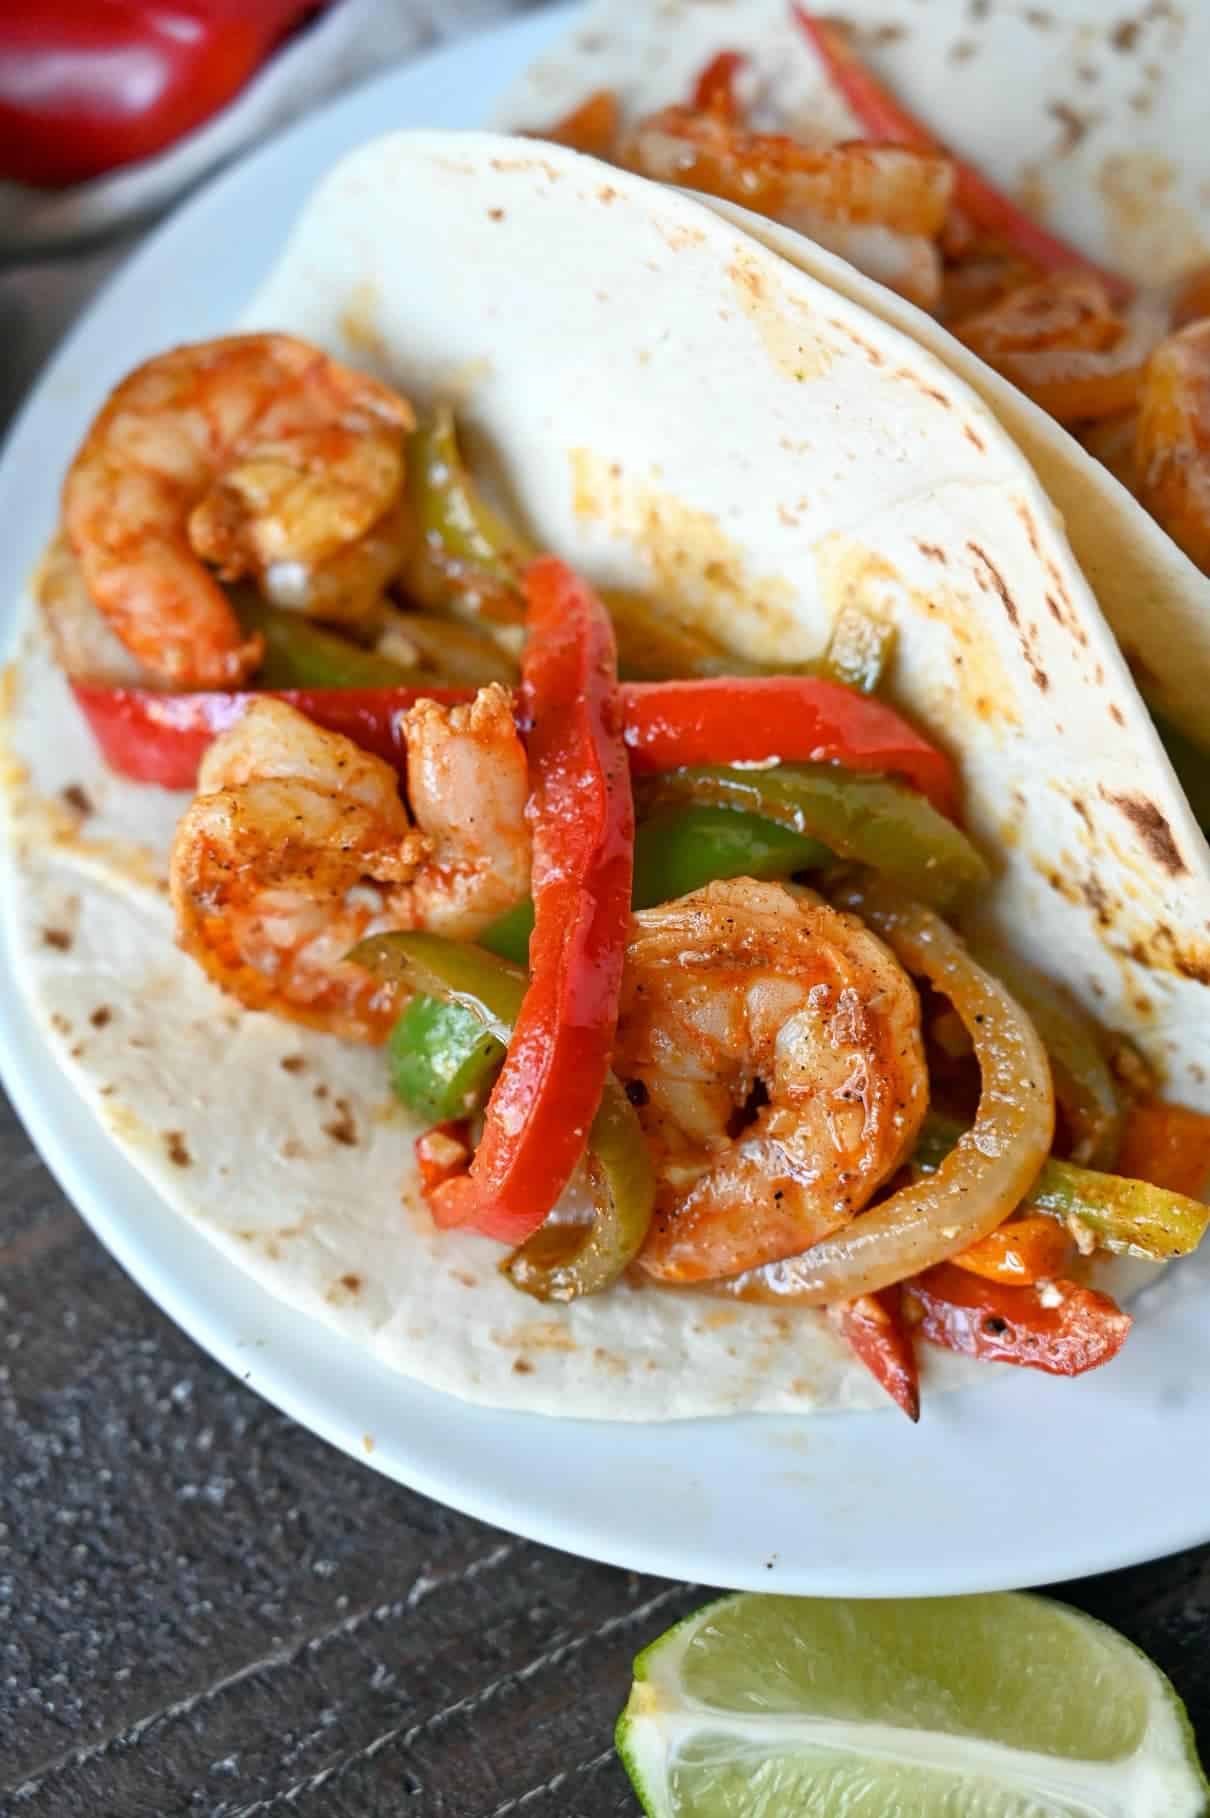 Shrimp, peppers placed in a flour tortilla.